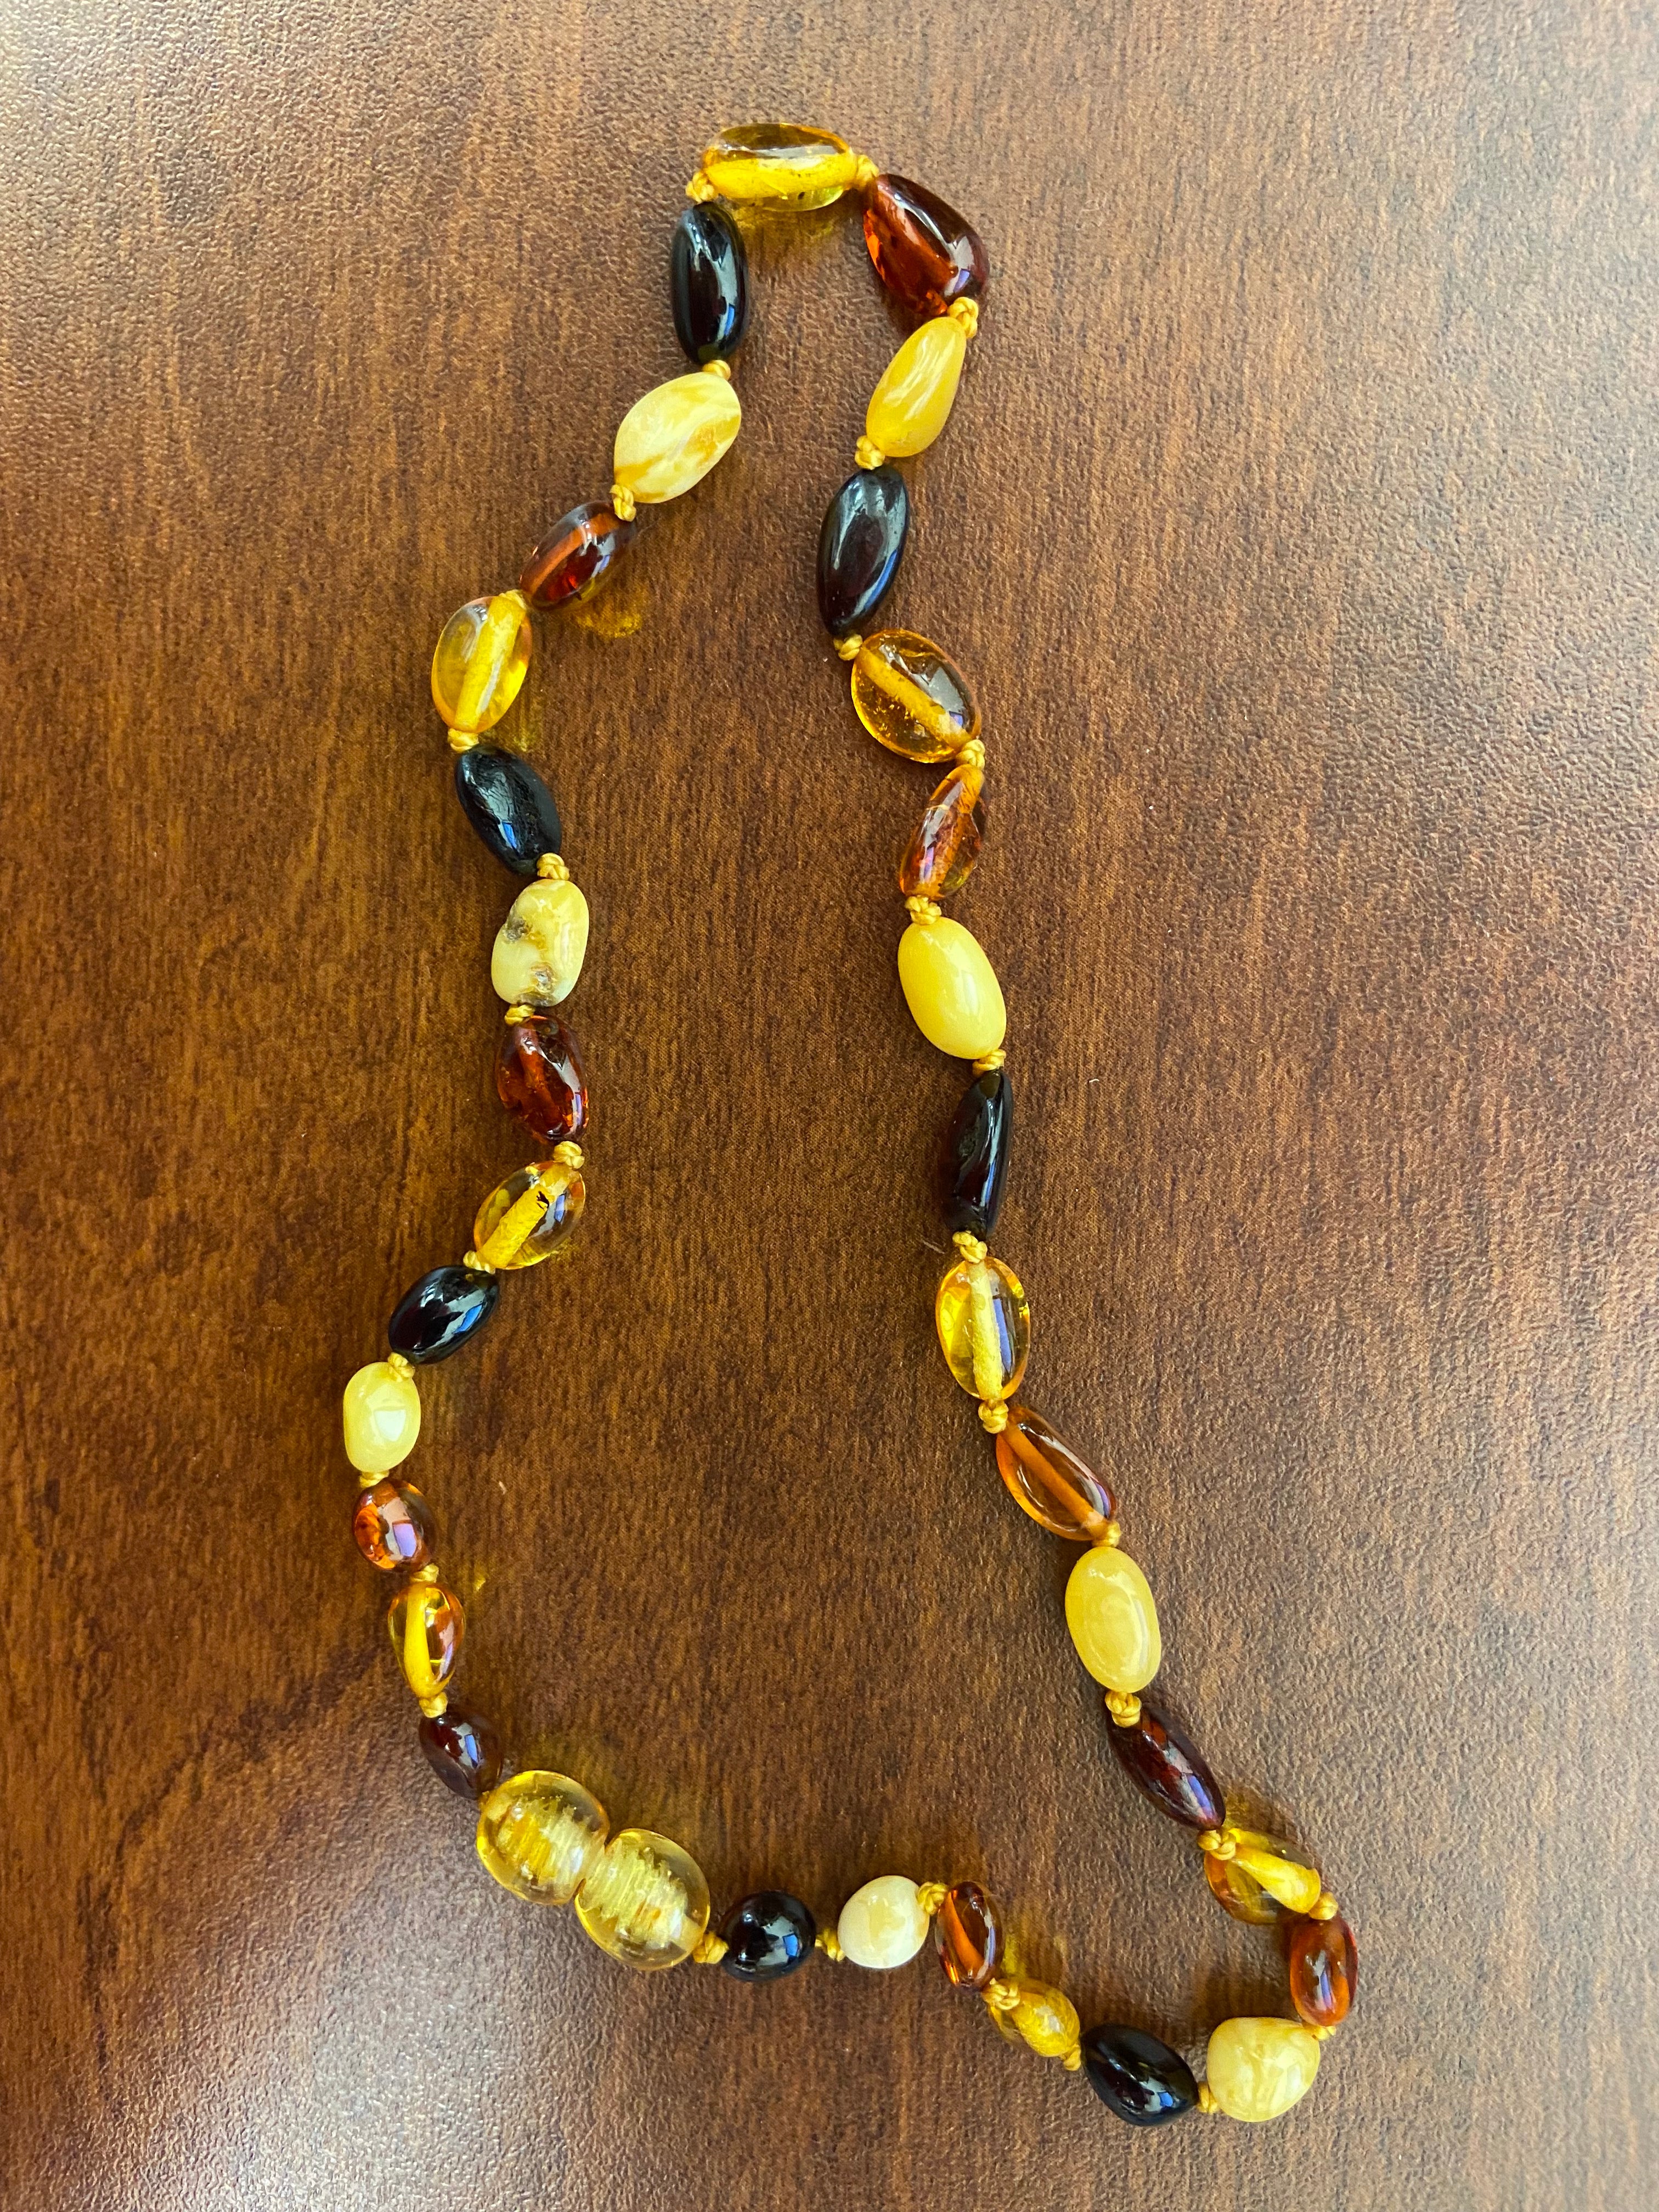 Amber Teething Necklace Multi Colour - Lighten Up Shop